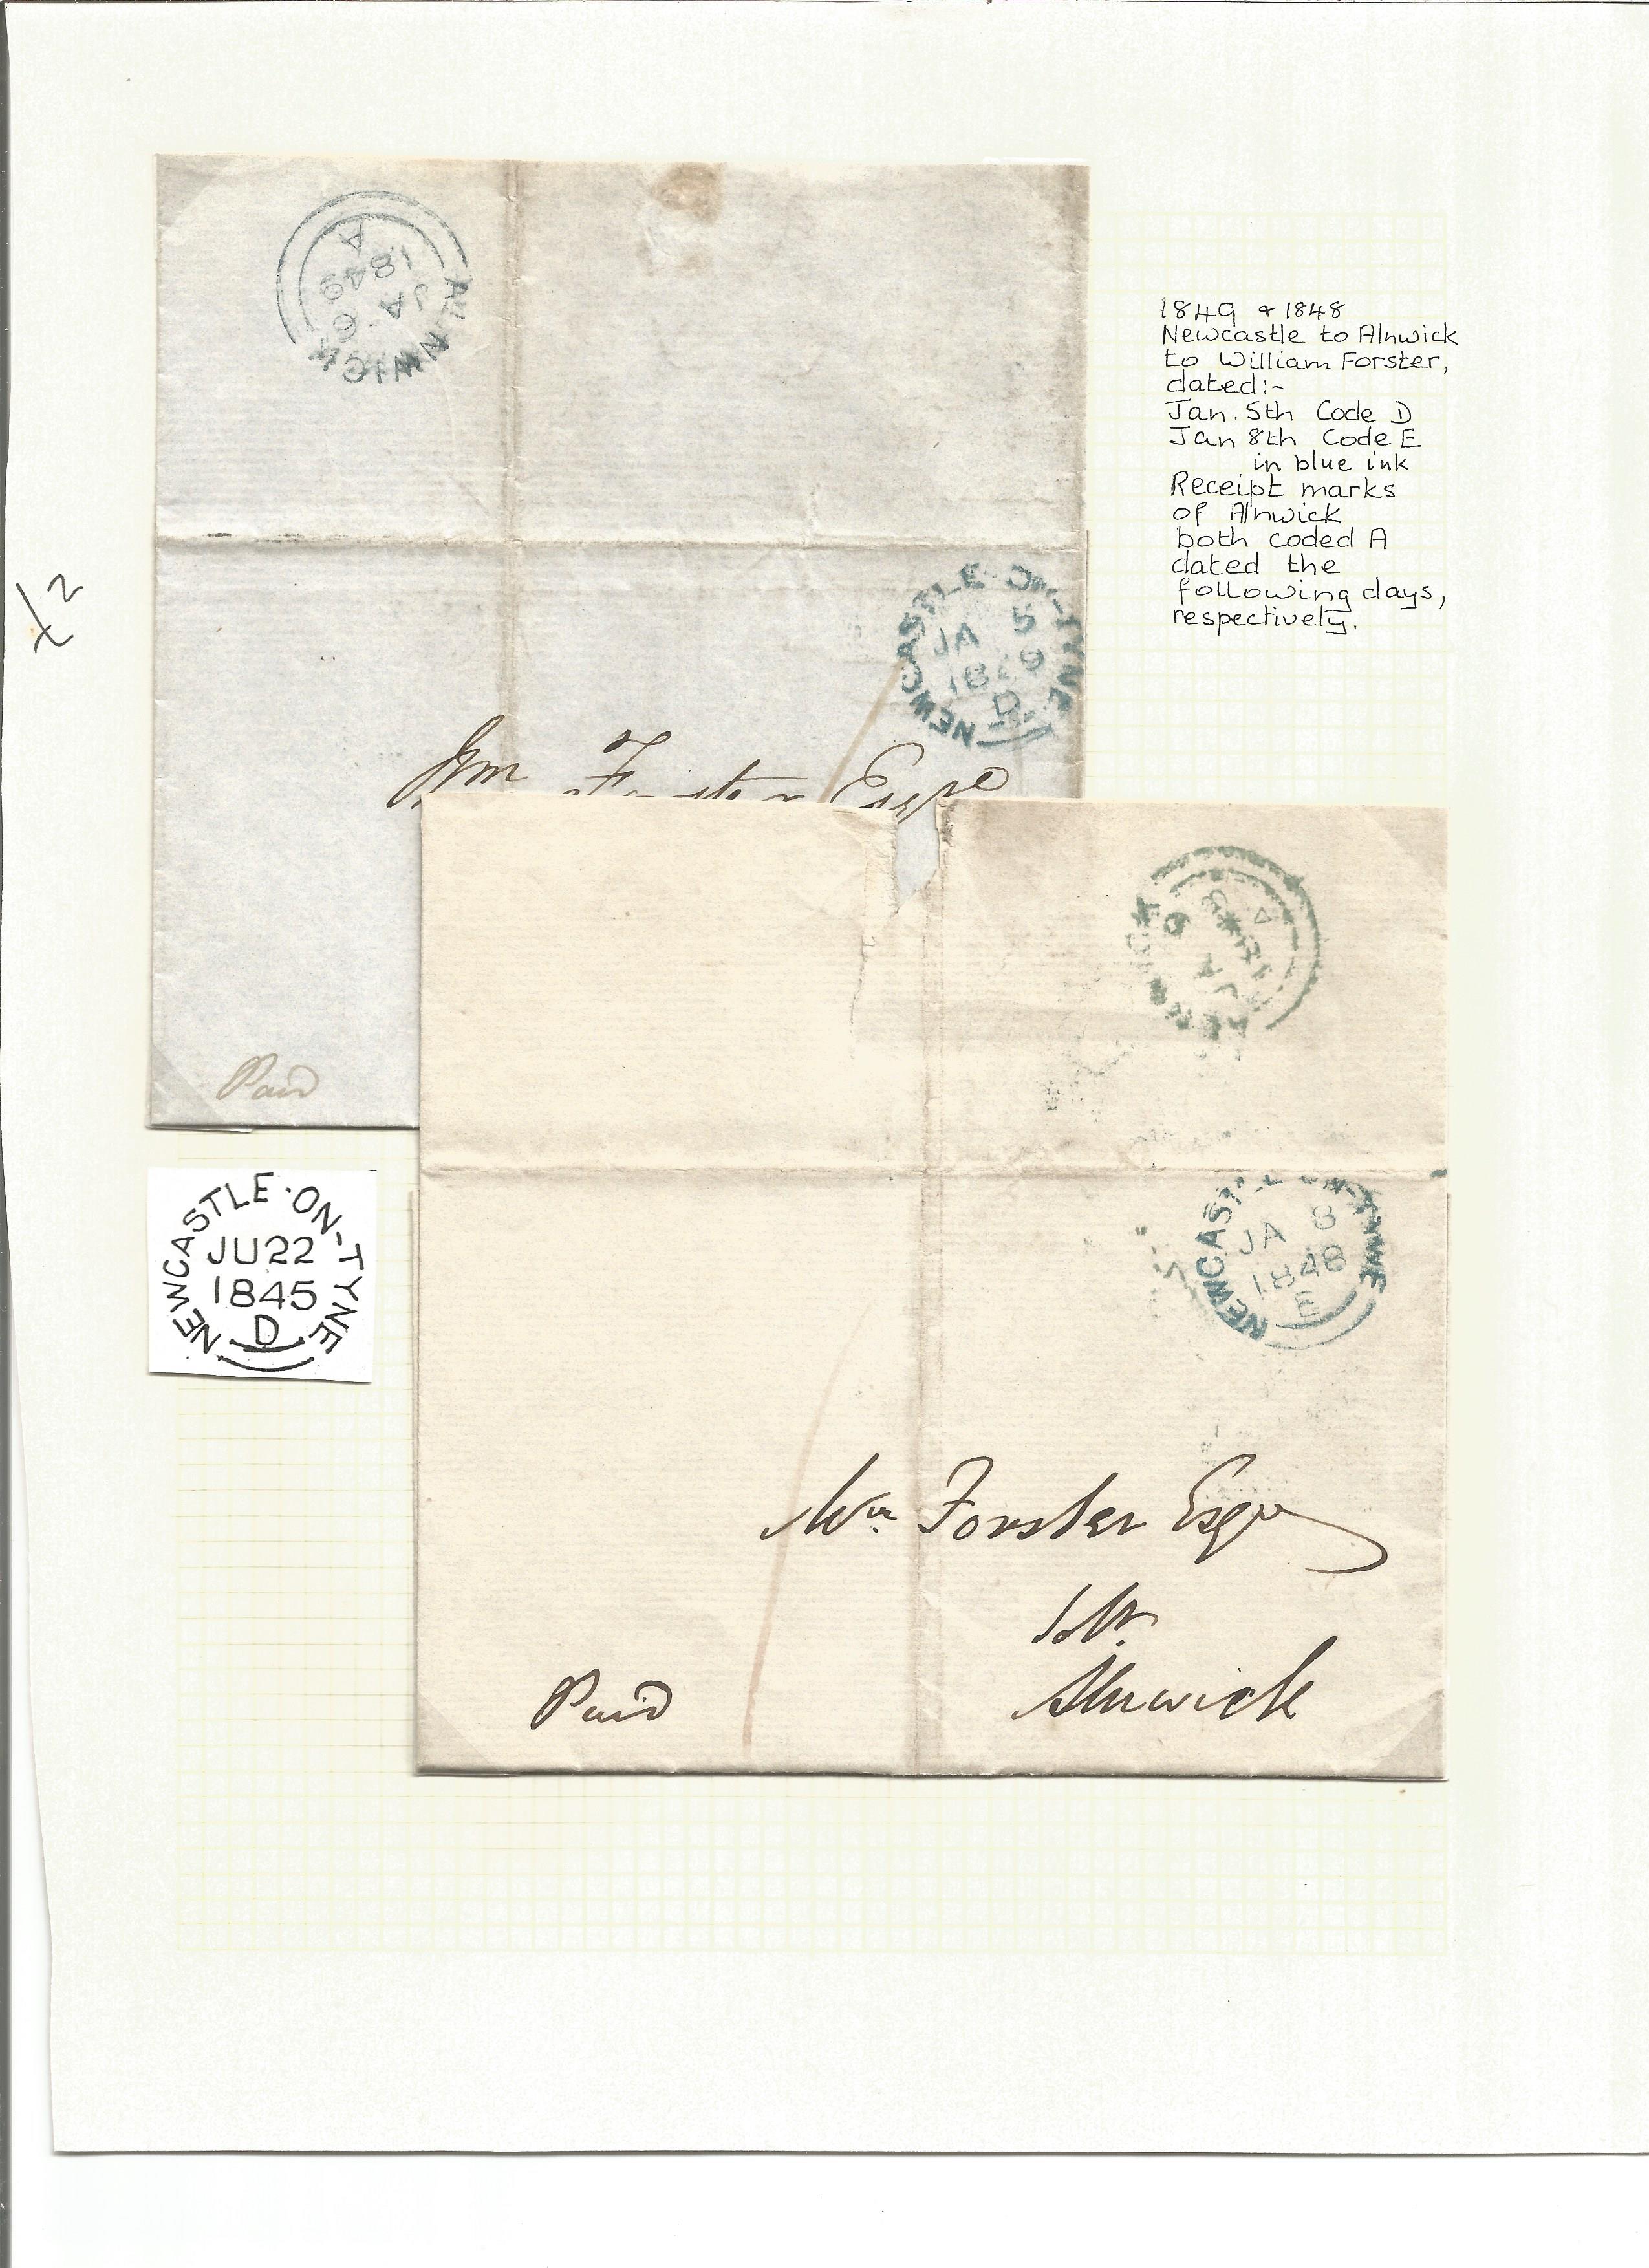 Postal History. 1849 and 1848 Newcastle to Alnwick. Good Condition. We combine postage on multiple